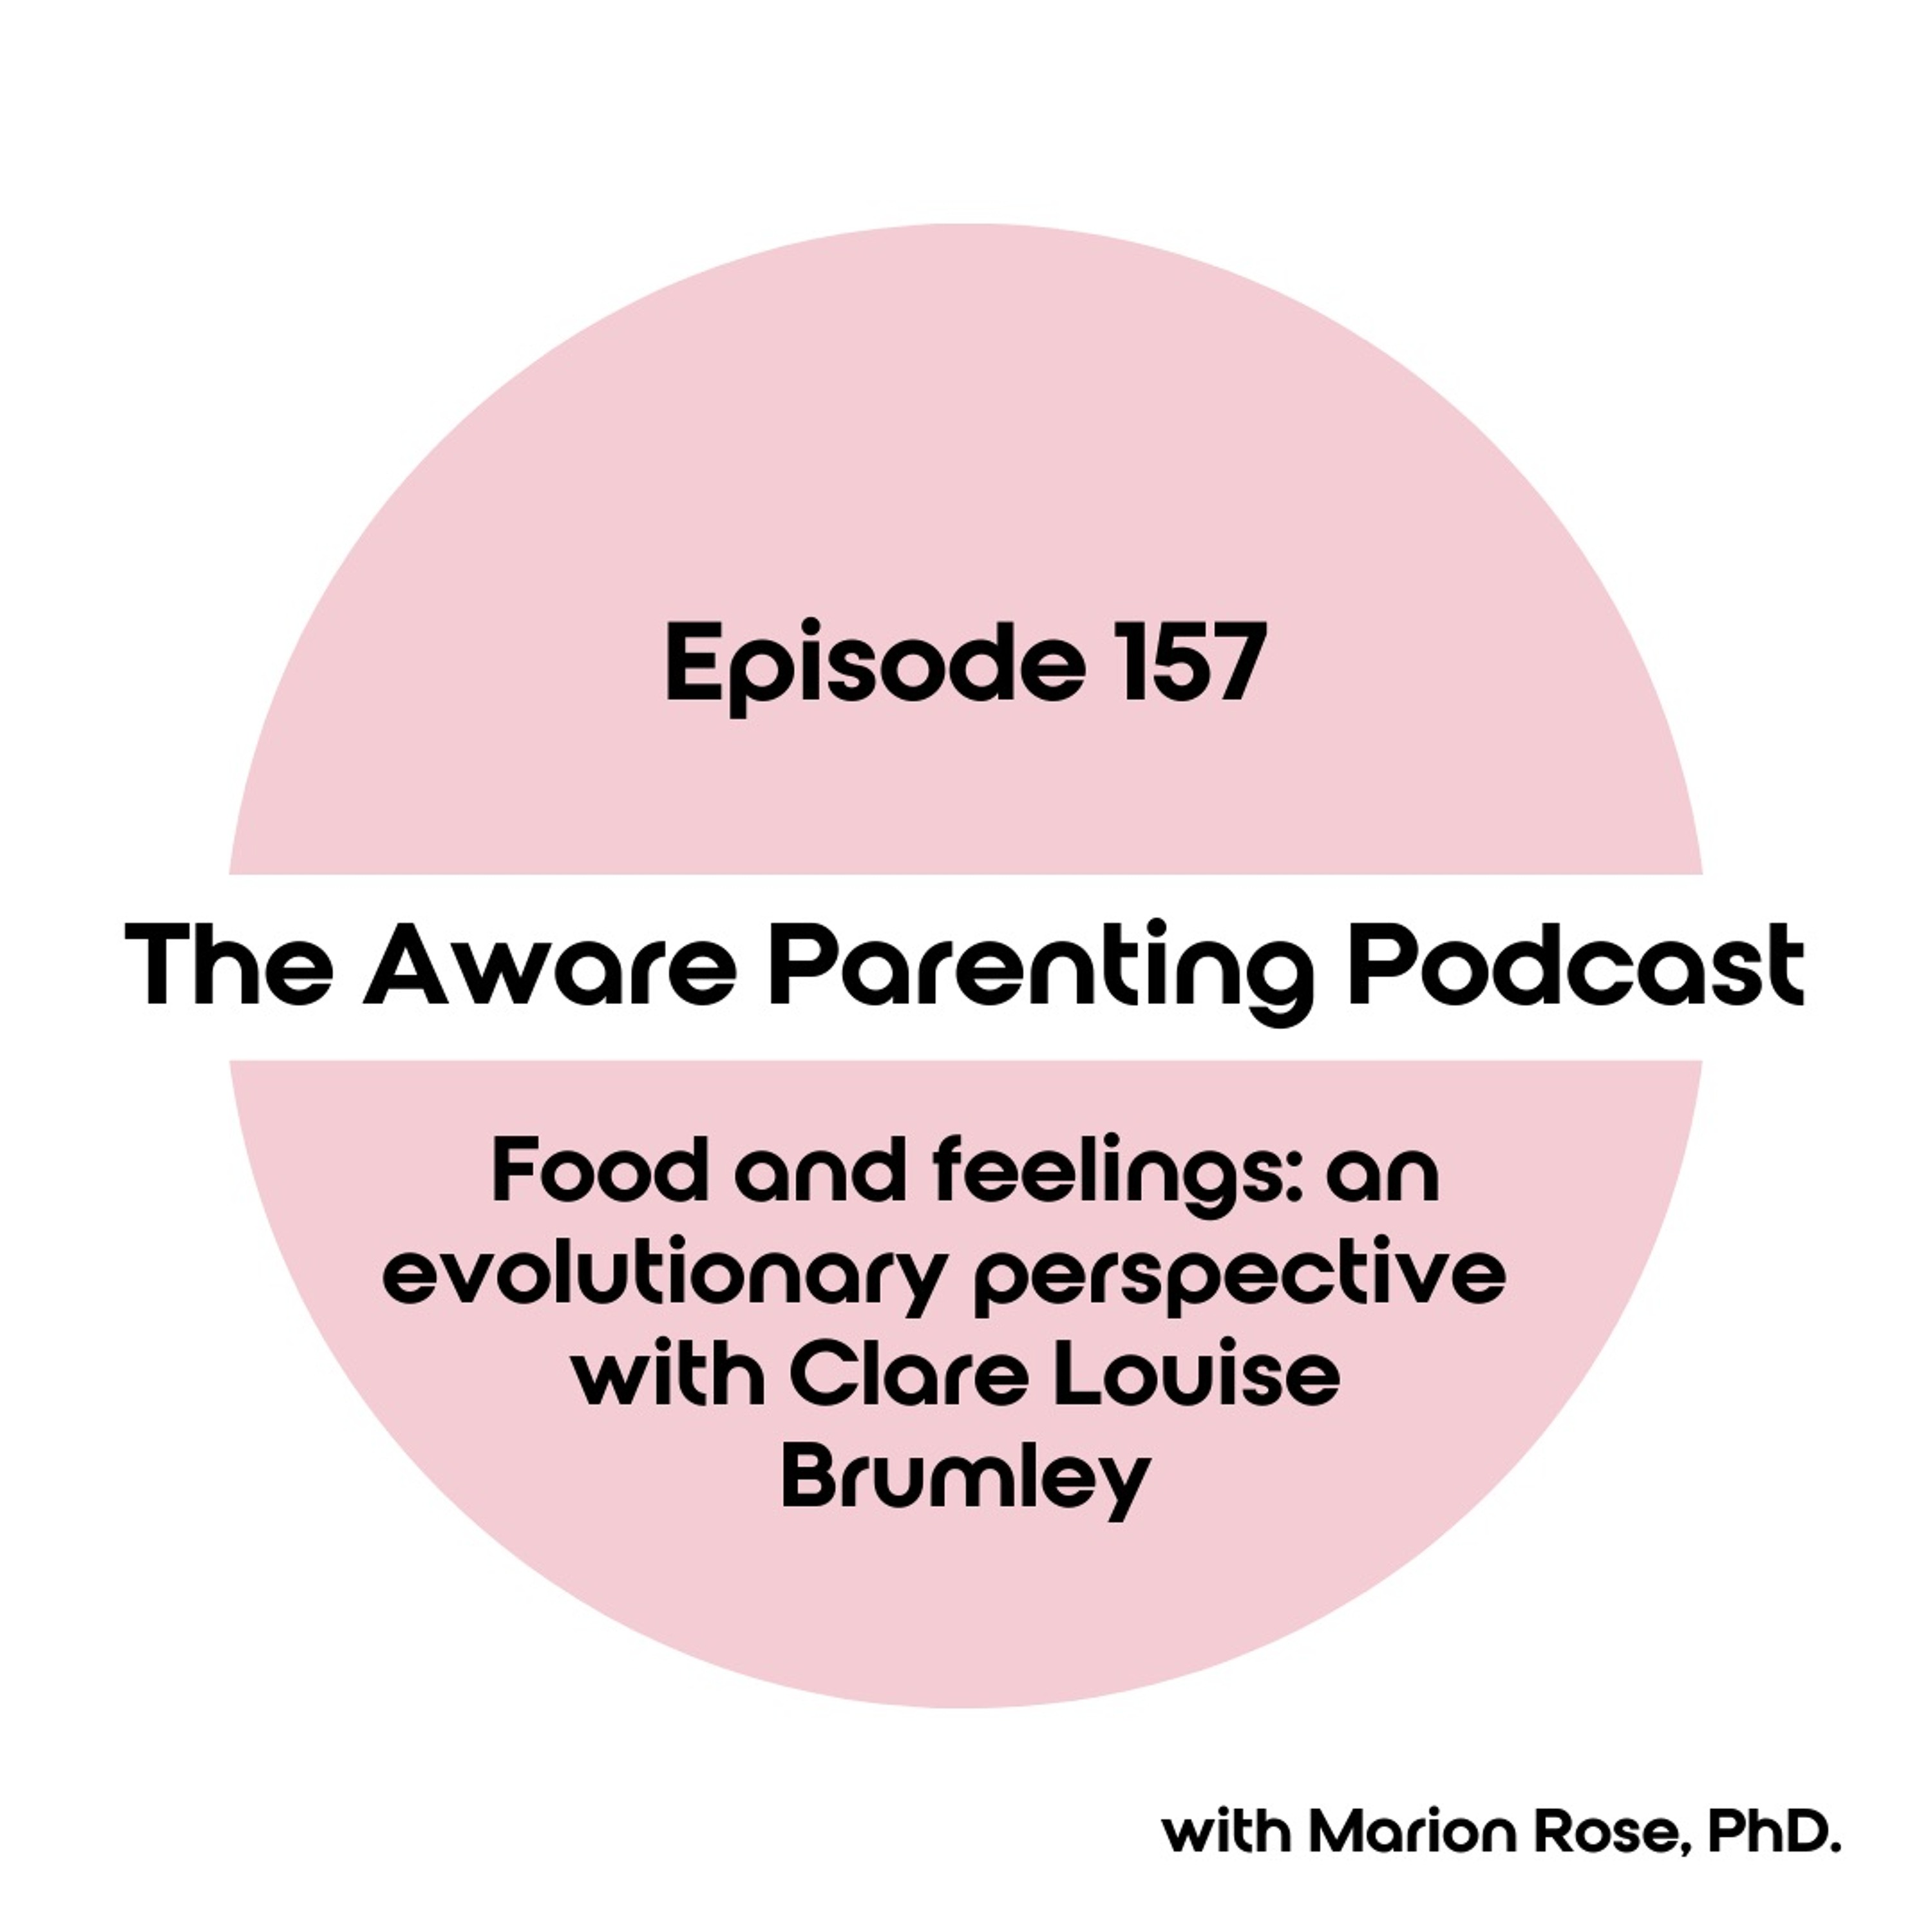 Episode 157: Food and feelings: an evolutionary perspective with Clare Louise Brumley